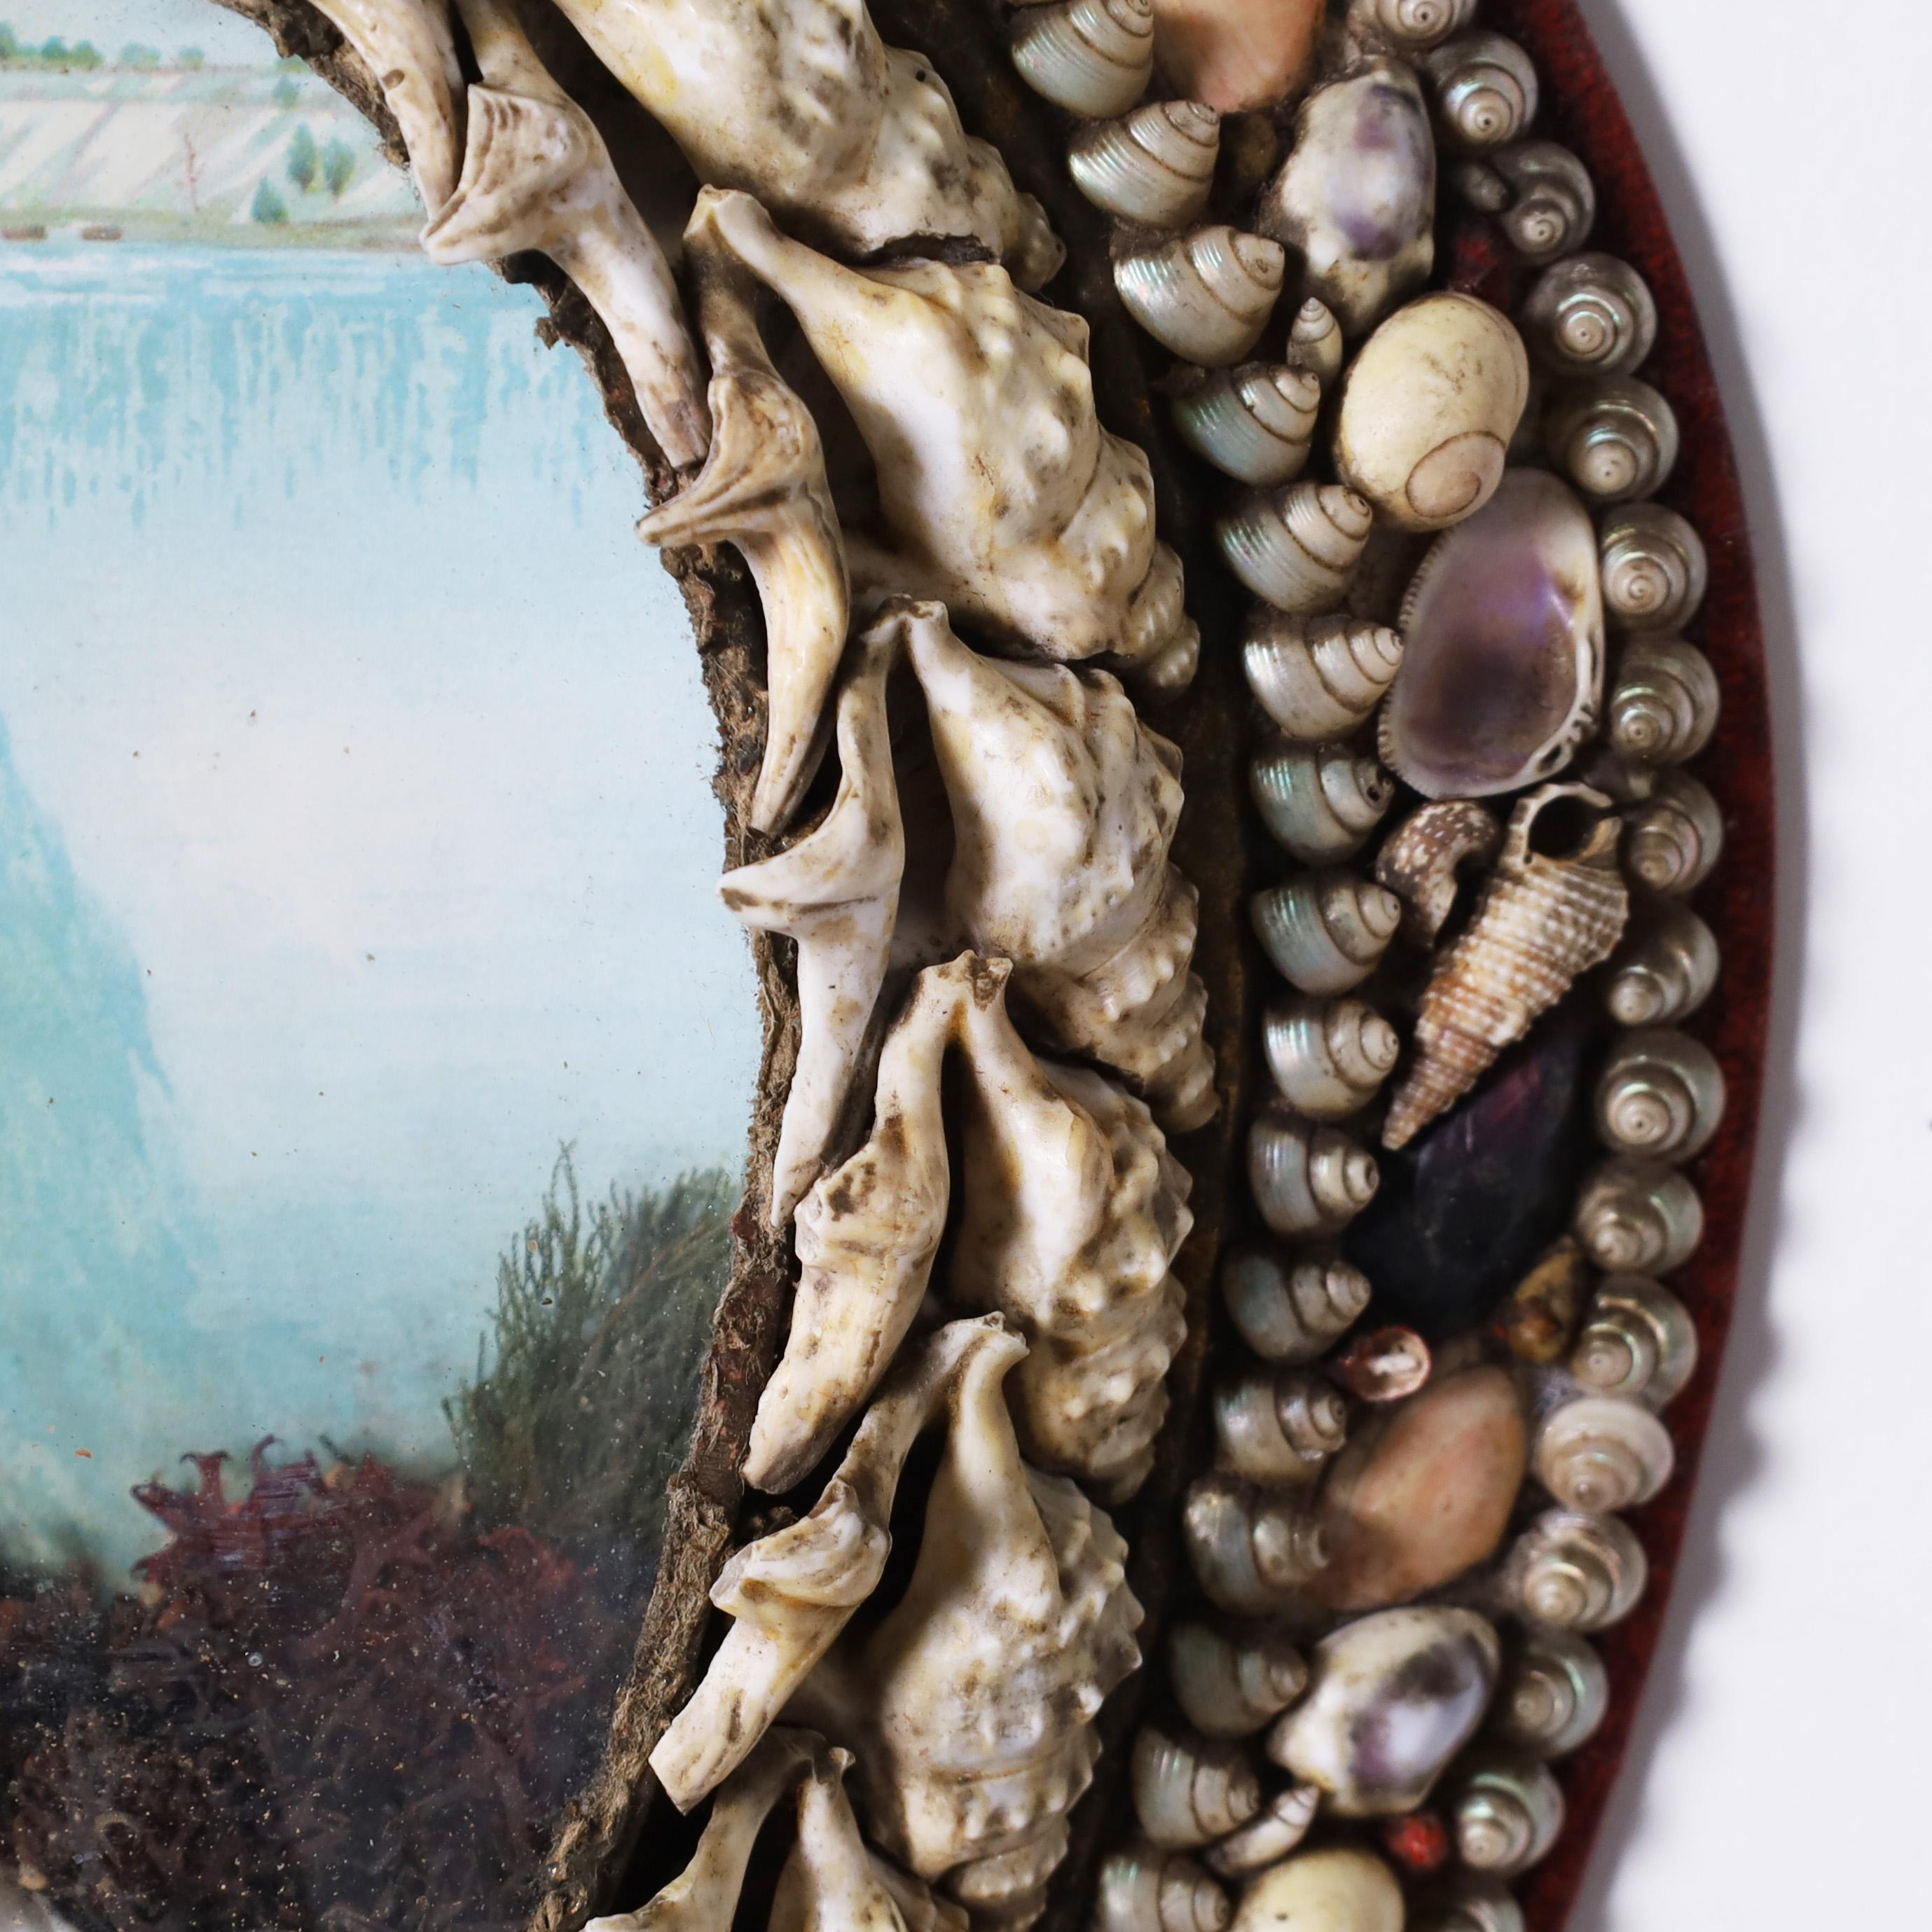 Charming antique sailors or honeymoon valentine with an unusual horse shoe form ambitiously decorated with exotic seashells around a convex glass lens decorated on the inside with shell and pink coral against Niagara Falls. 